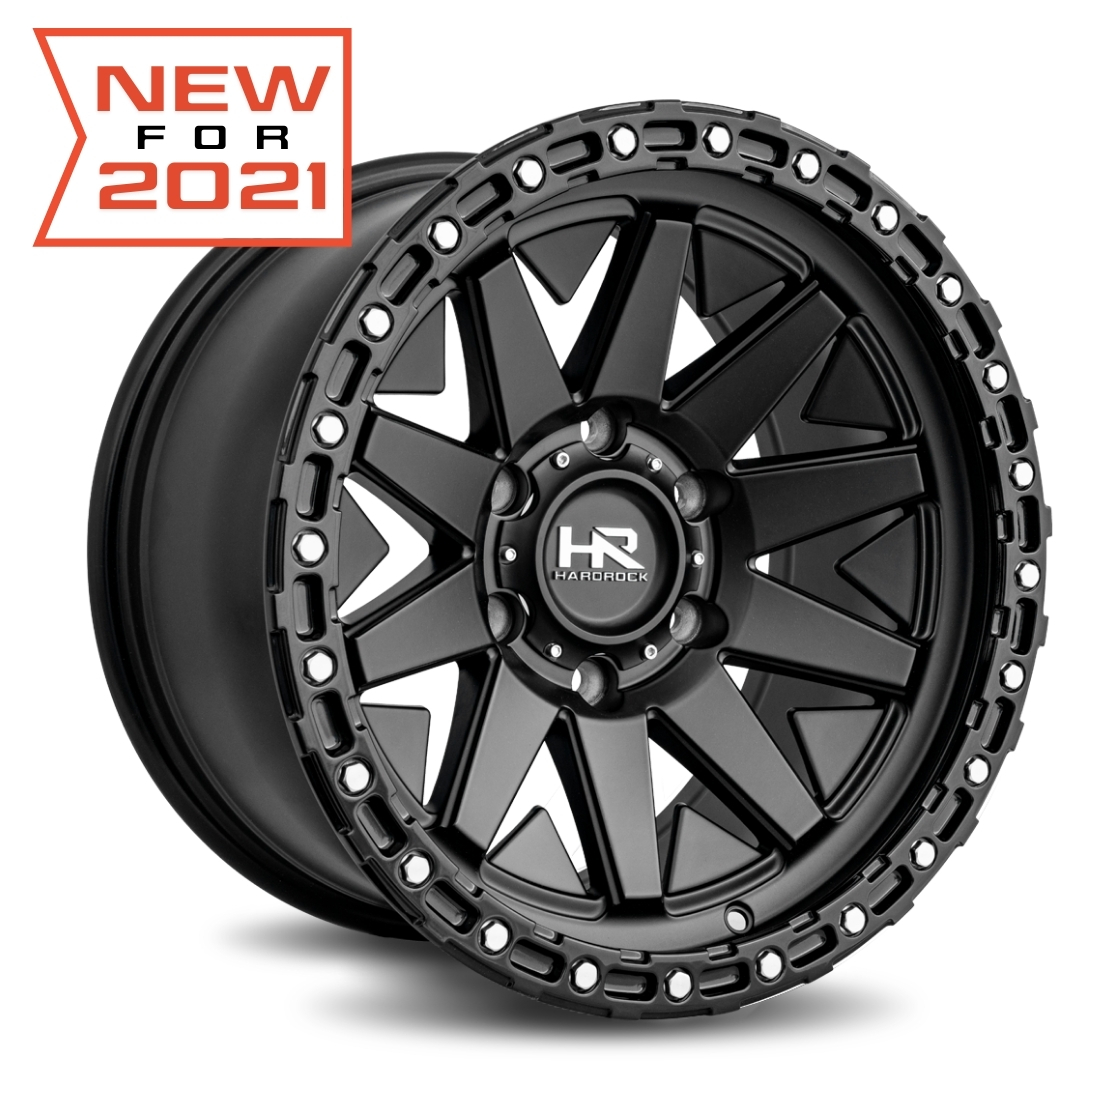 New Aftermarket Off-Road Wheels